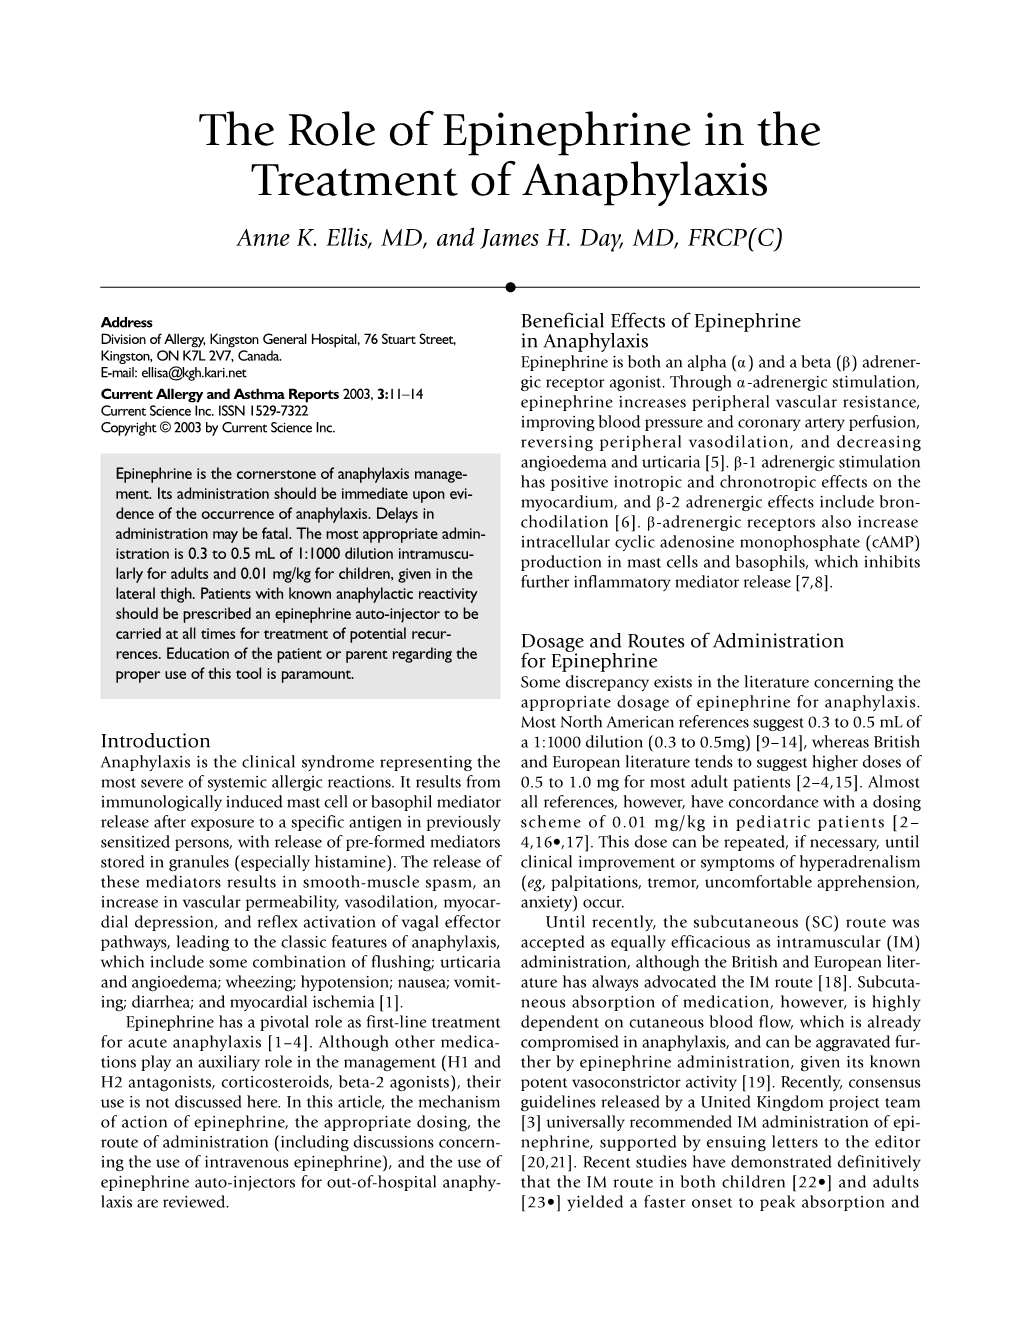 The Role of Epinephrine in the Treatment of Anaphylaxis Anne K